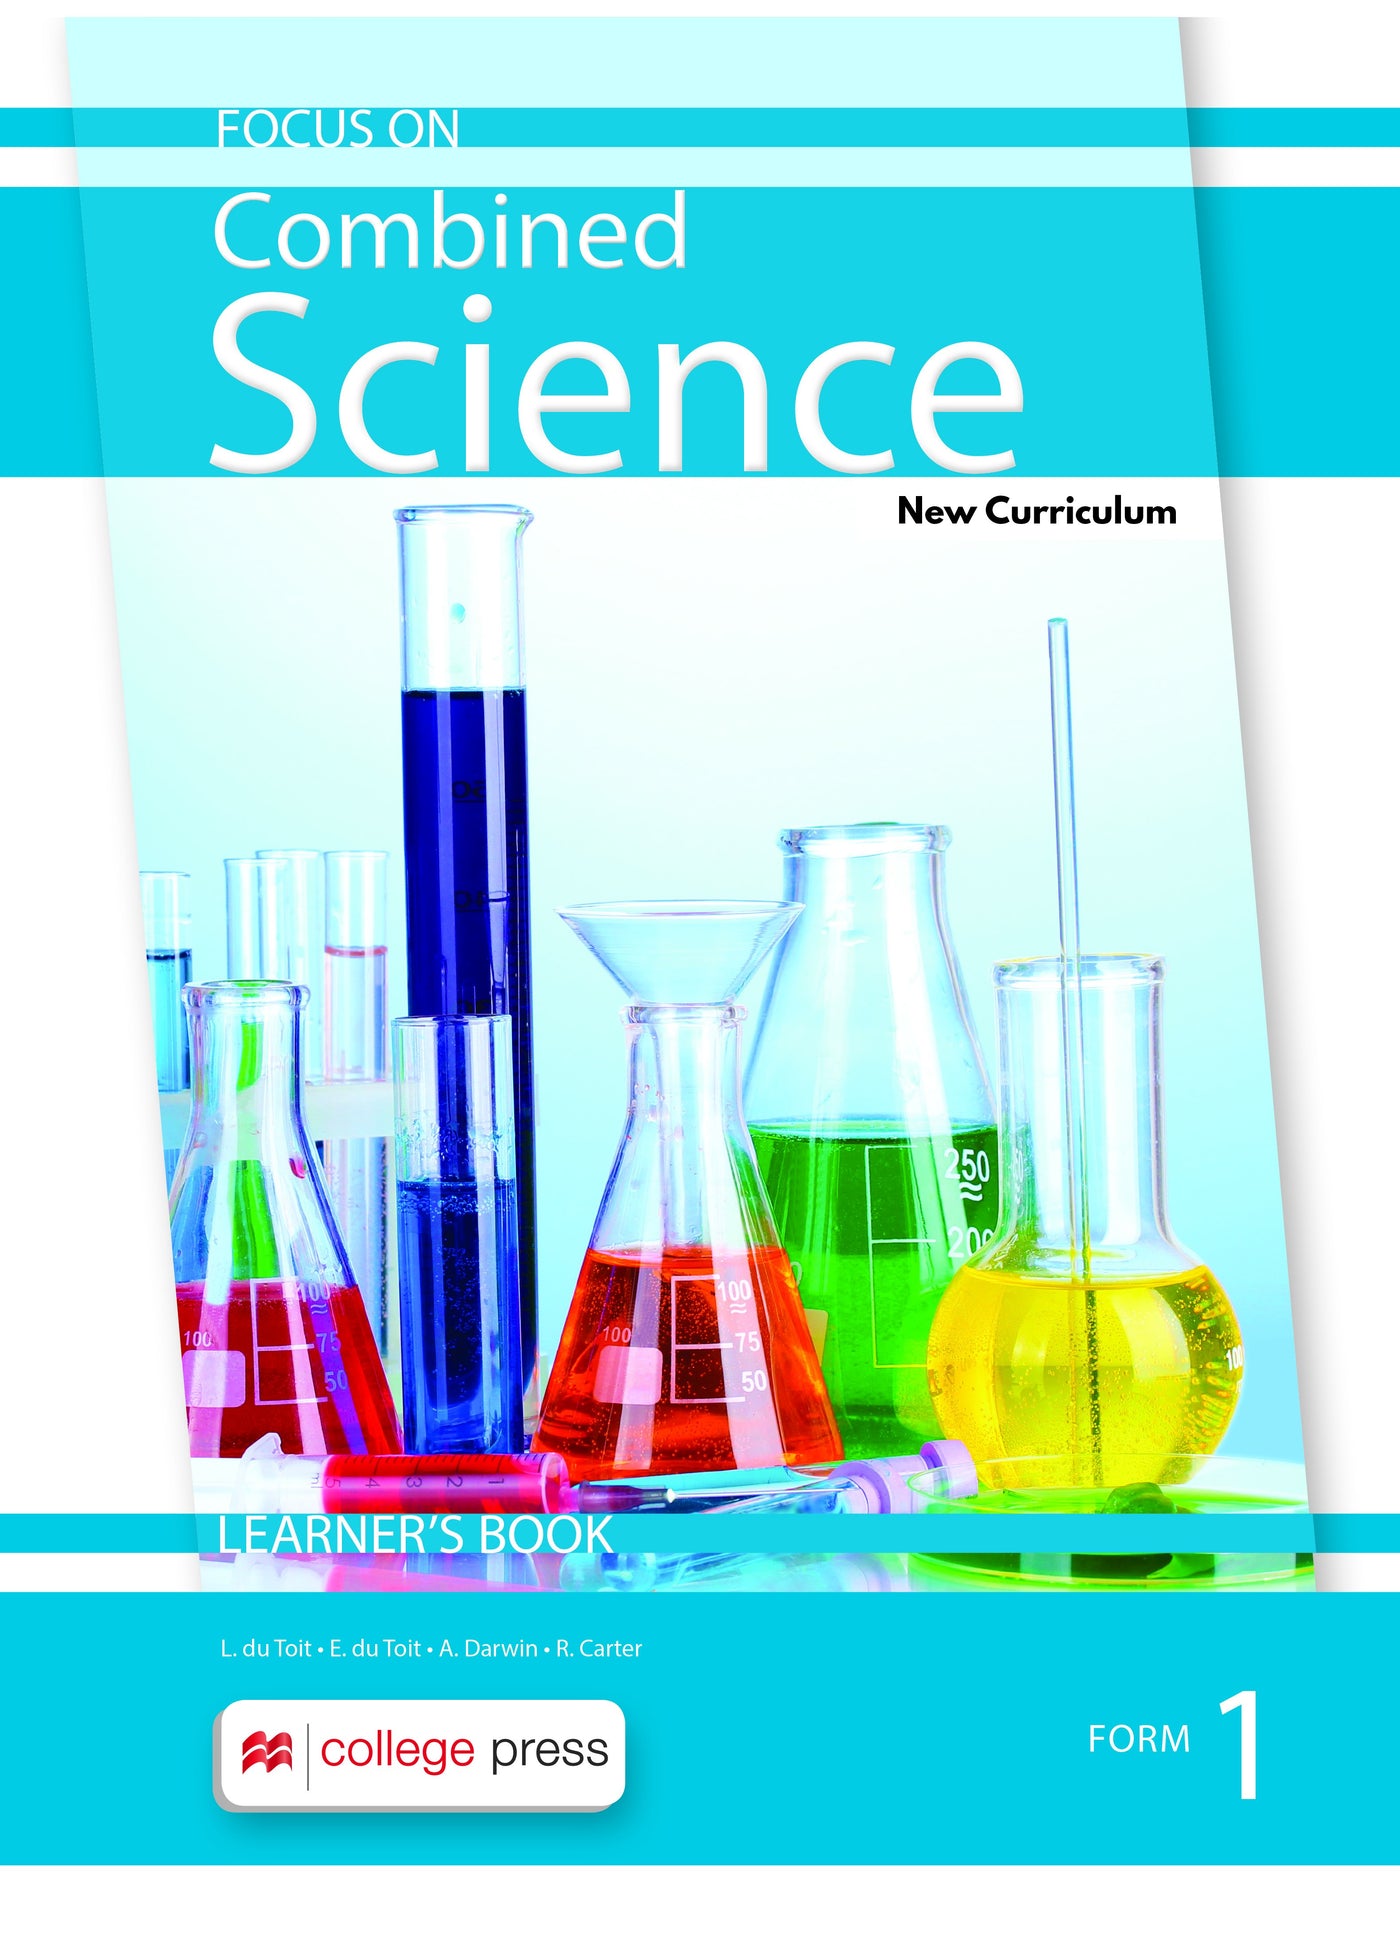 Science Textbook Form 1  malaytng